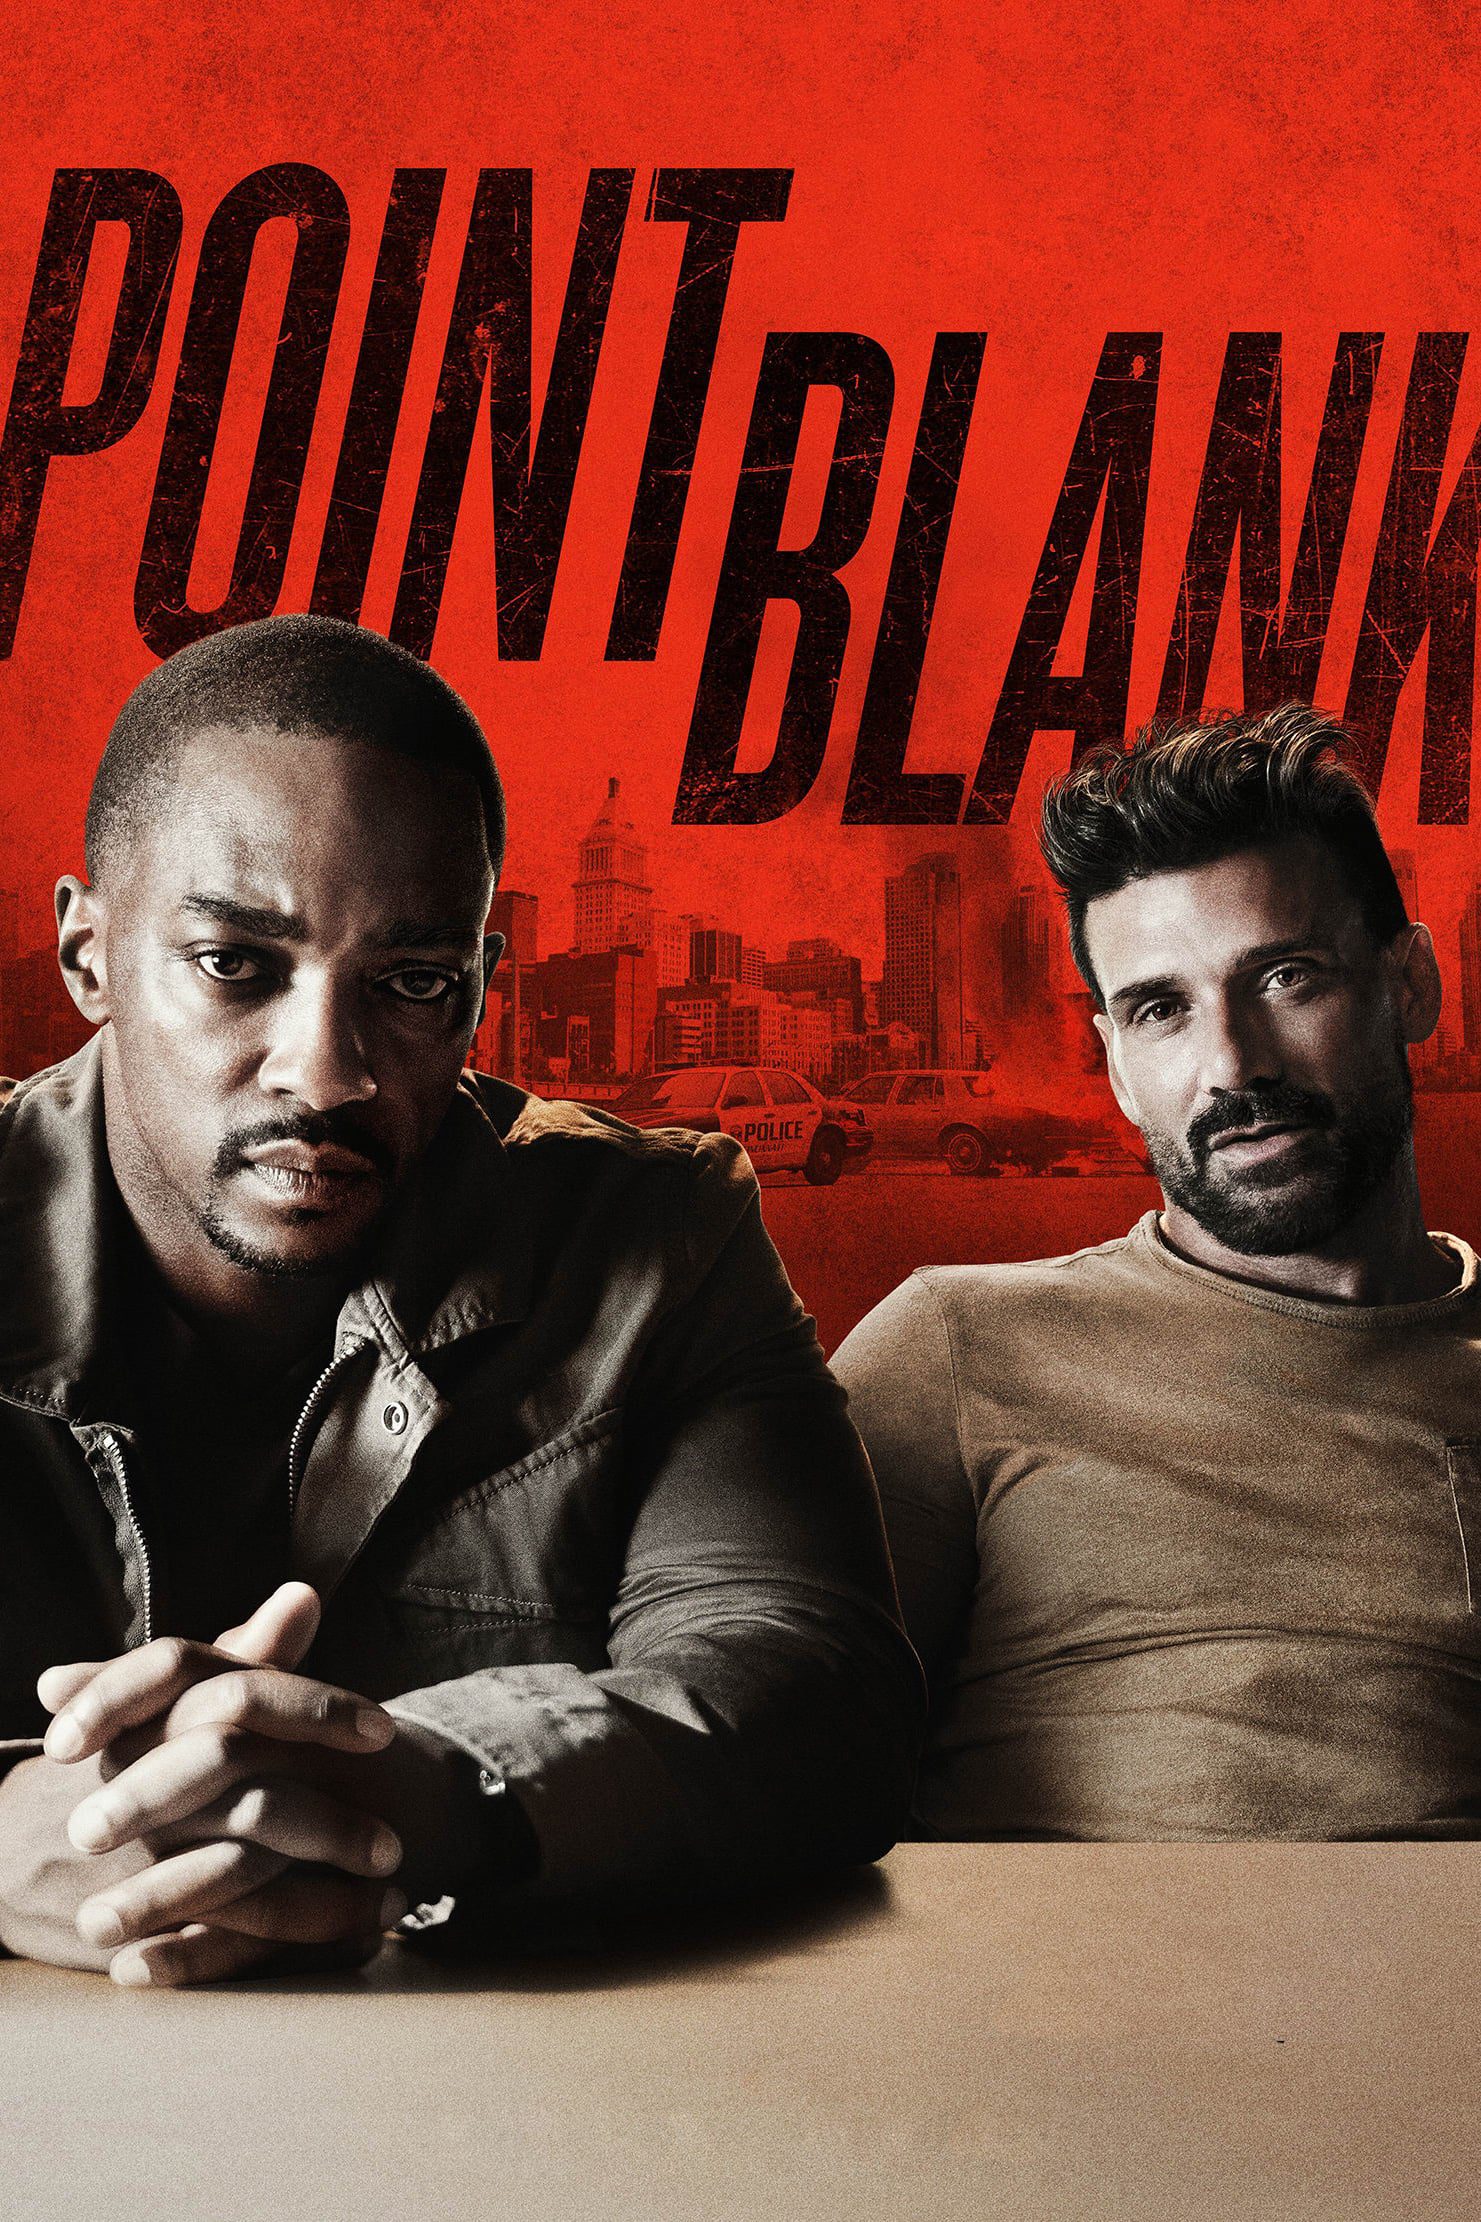 Poster for the movie "Point Blank"